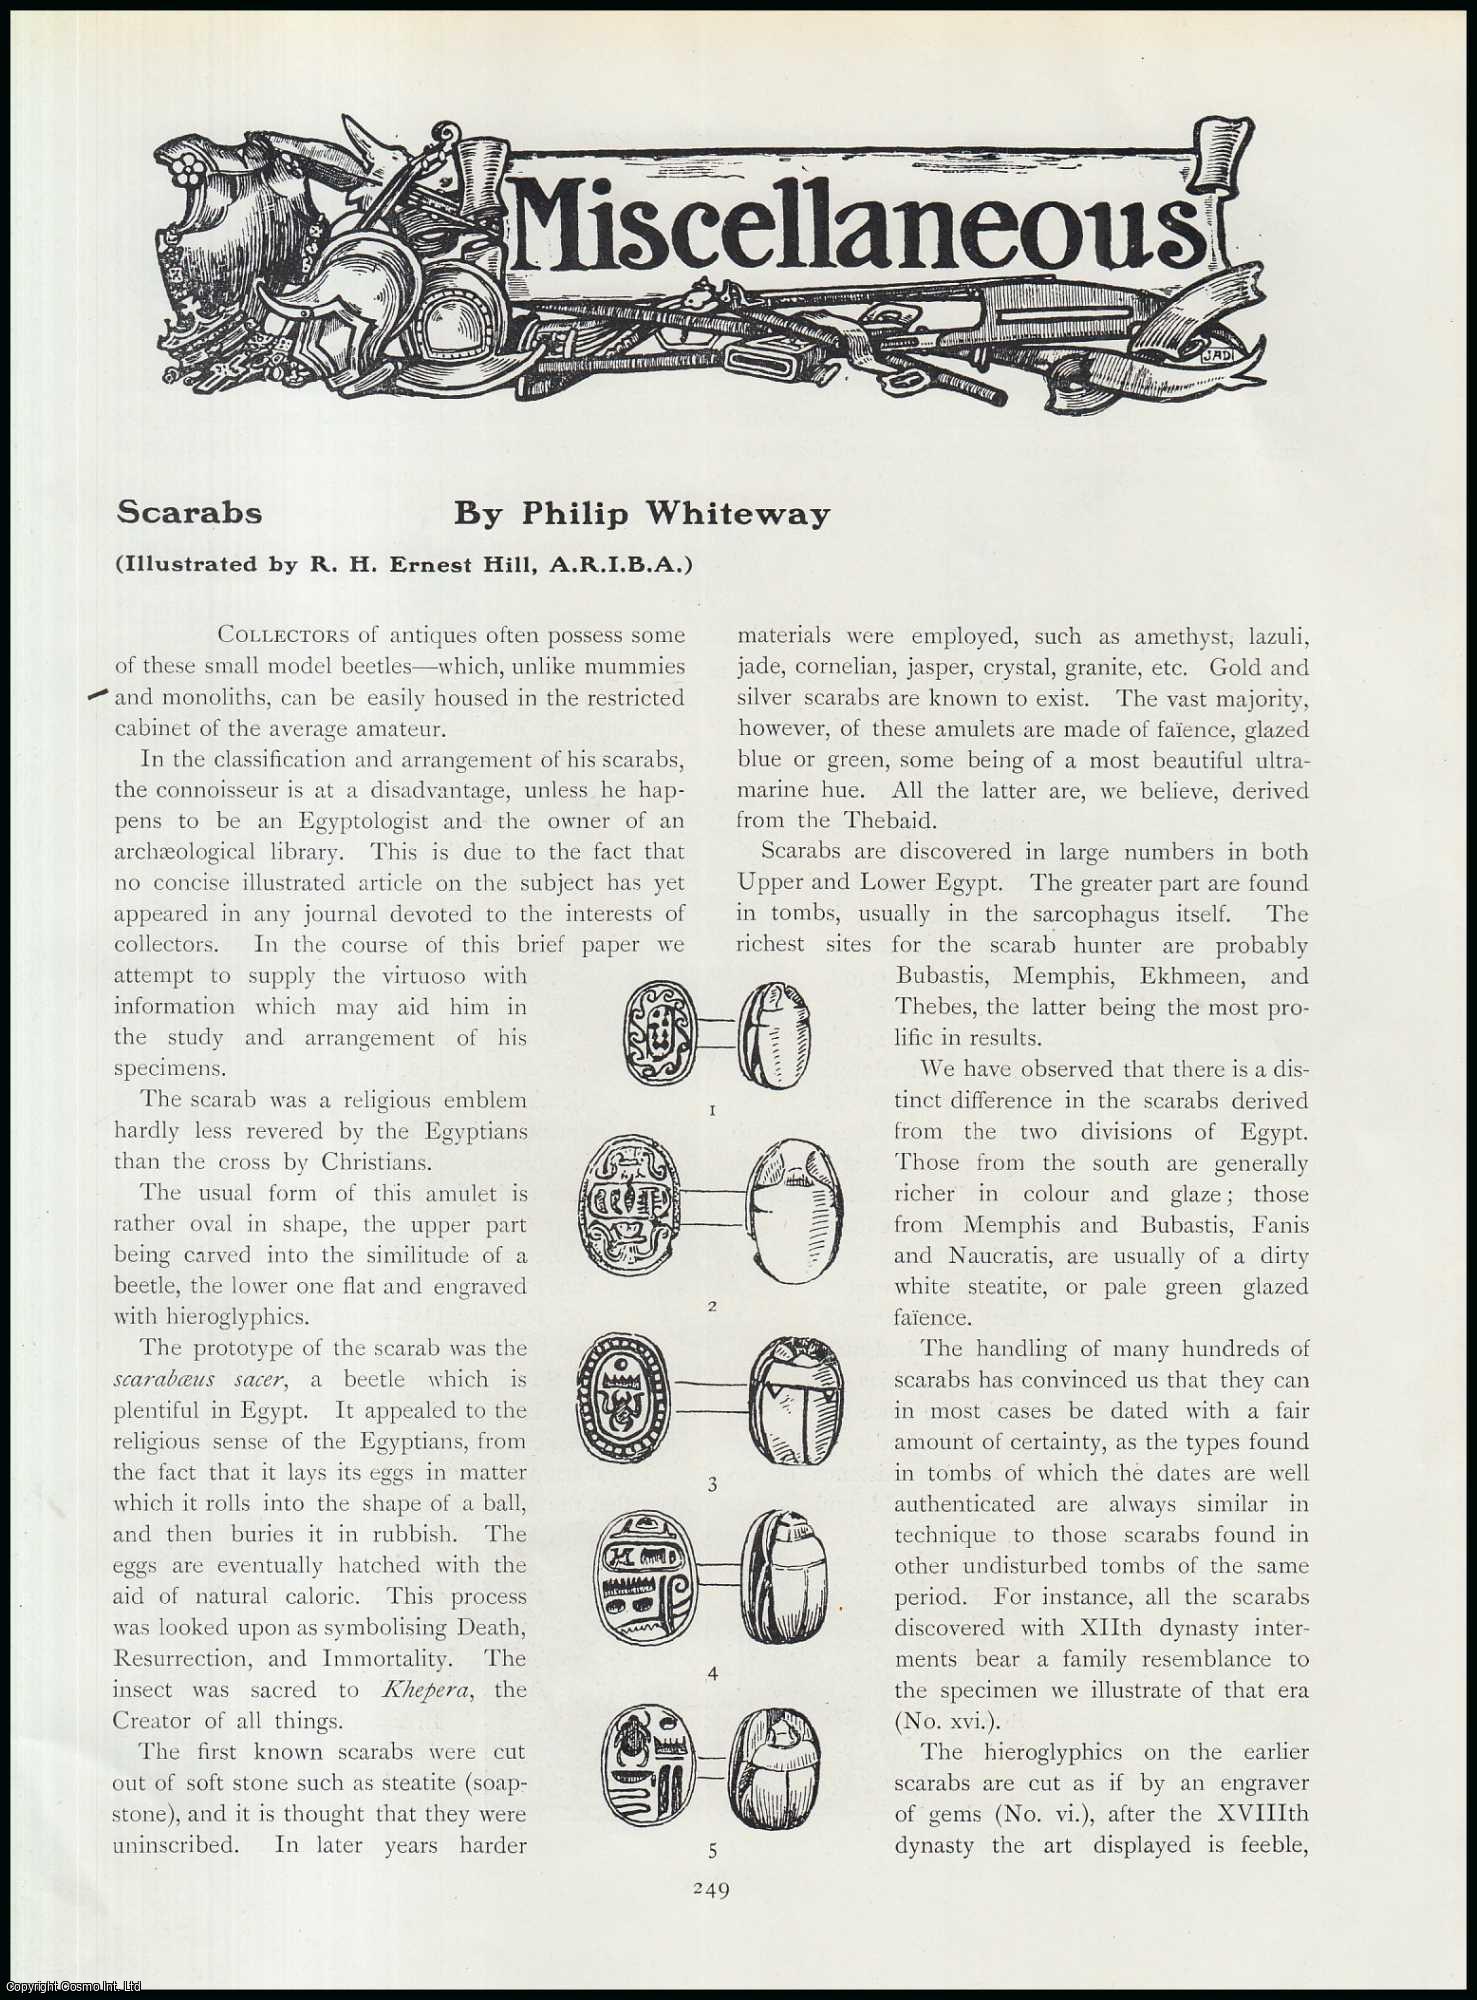 Philip Whiteway - Scarabs : a Religious Emblem. An original article from The Connoisseur, 1906.